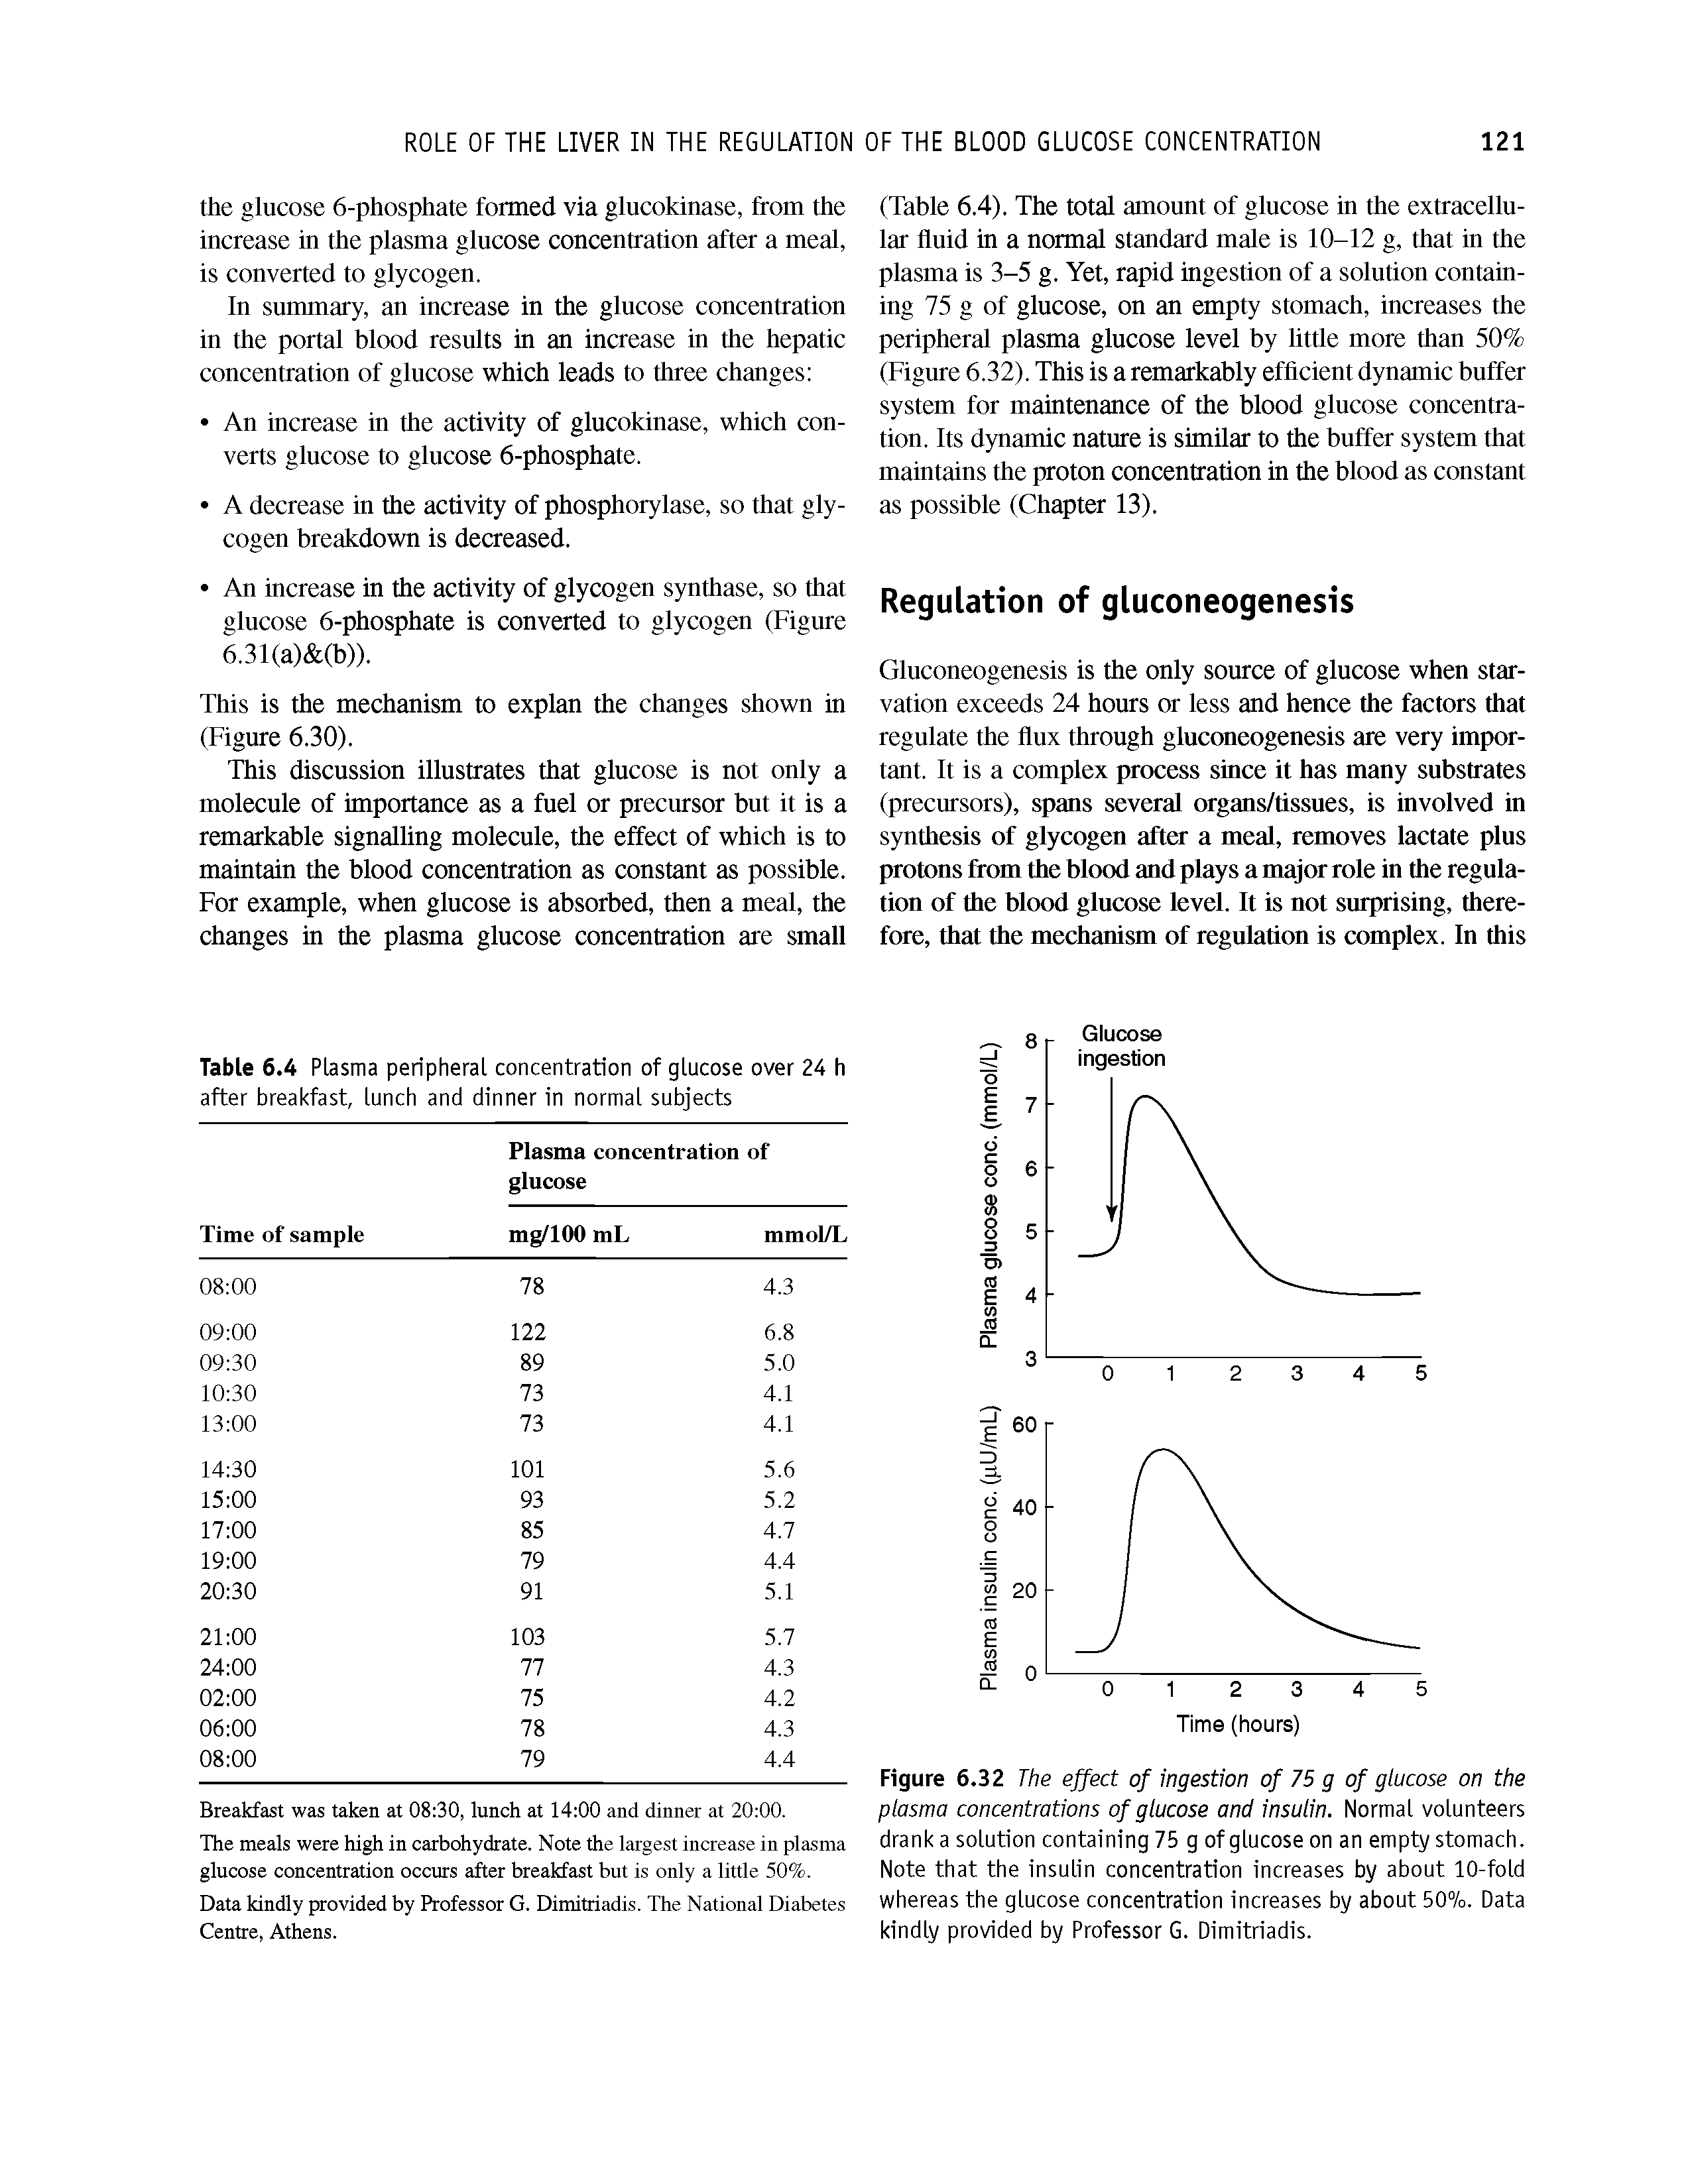 Figure 6.32 The effect of ingestion of 75 g of glucose on the plasma concentrations of glucose and insulin. Normal volunteers drank a solution containing 75 g of glucose on an empty stomach. Note that the insulin concentration increases by about 10-fold whereas the glucose concentration increases by about 50%. Data kindly provided by Professor G. Dimitriadis.